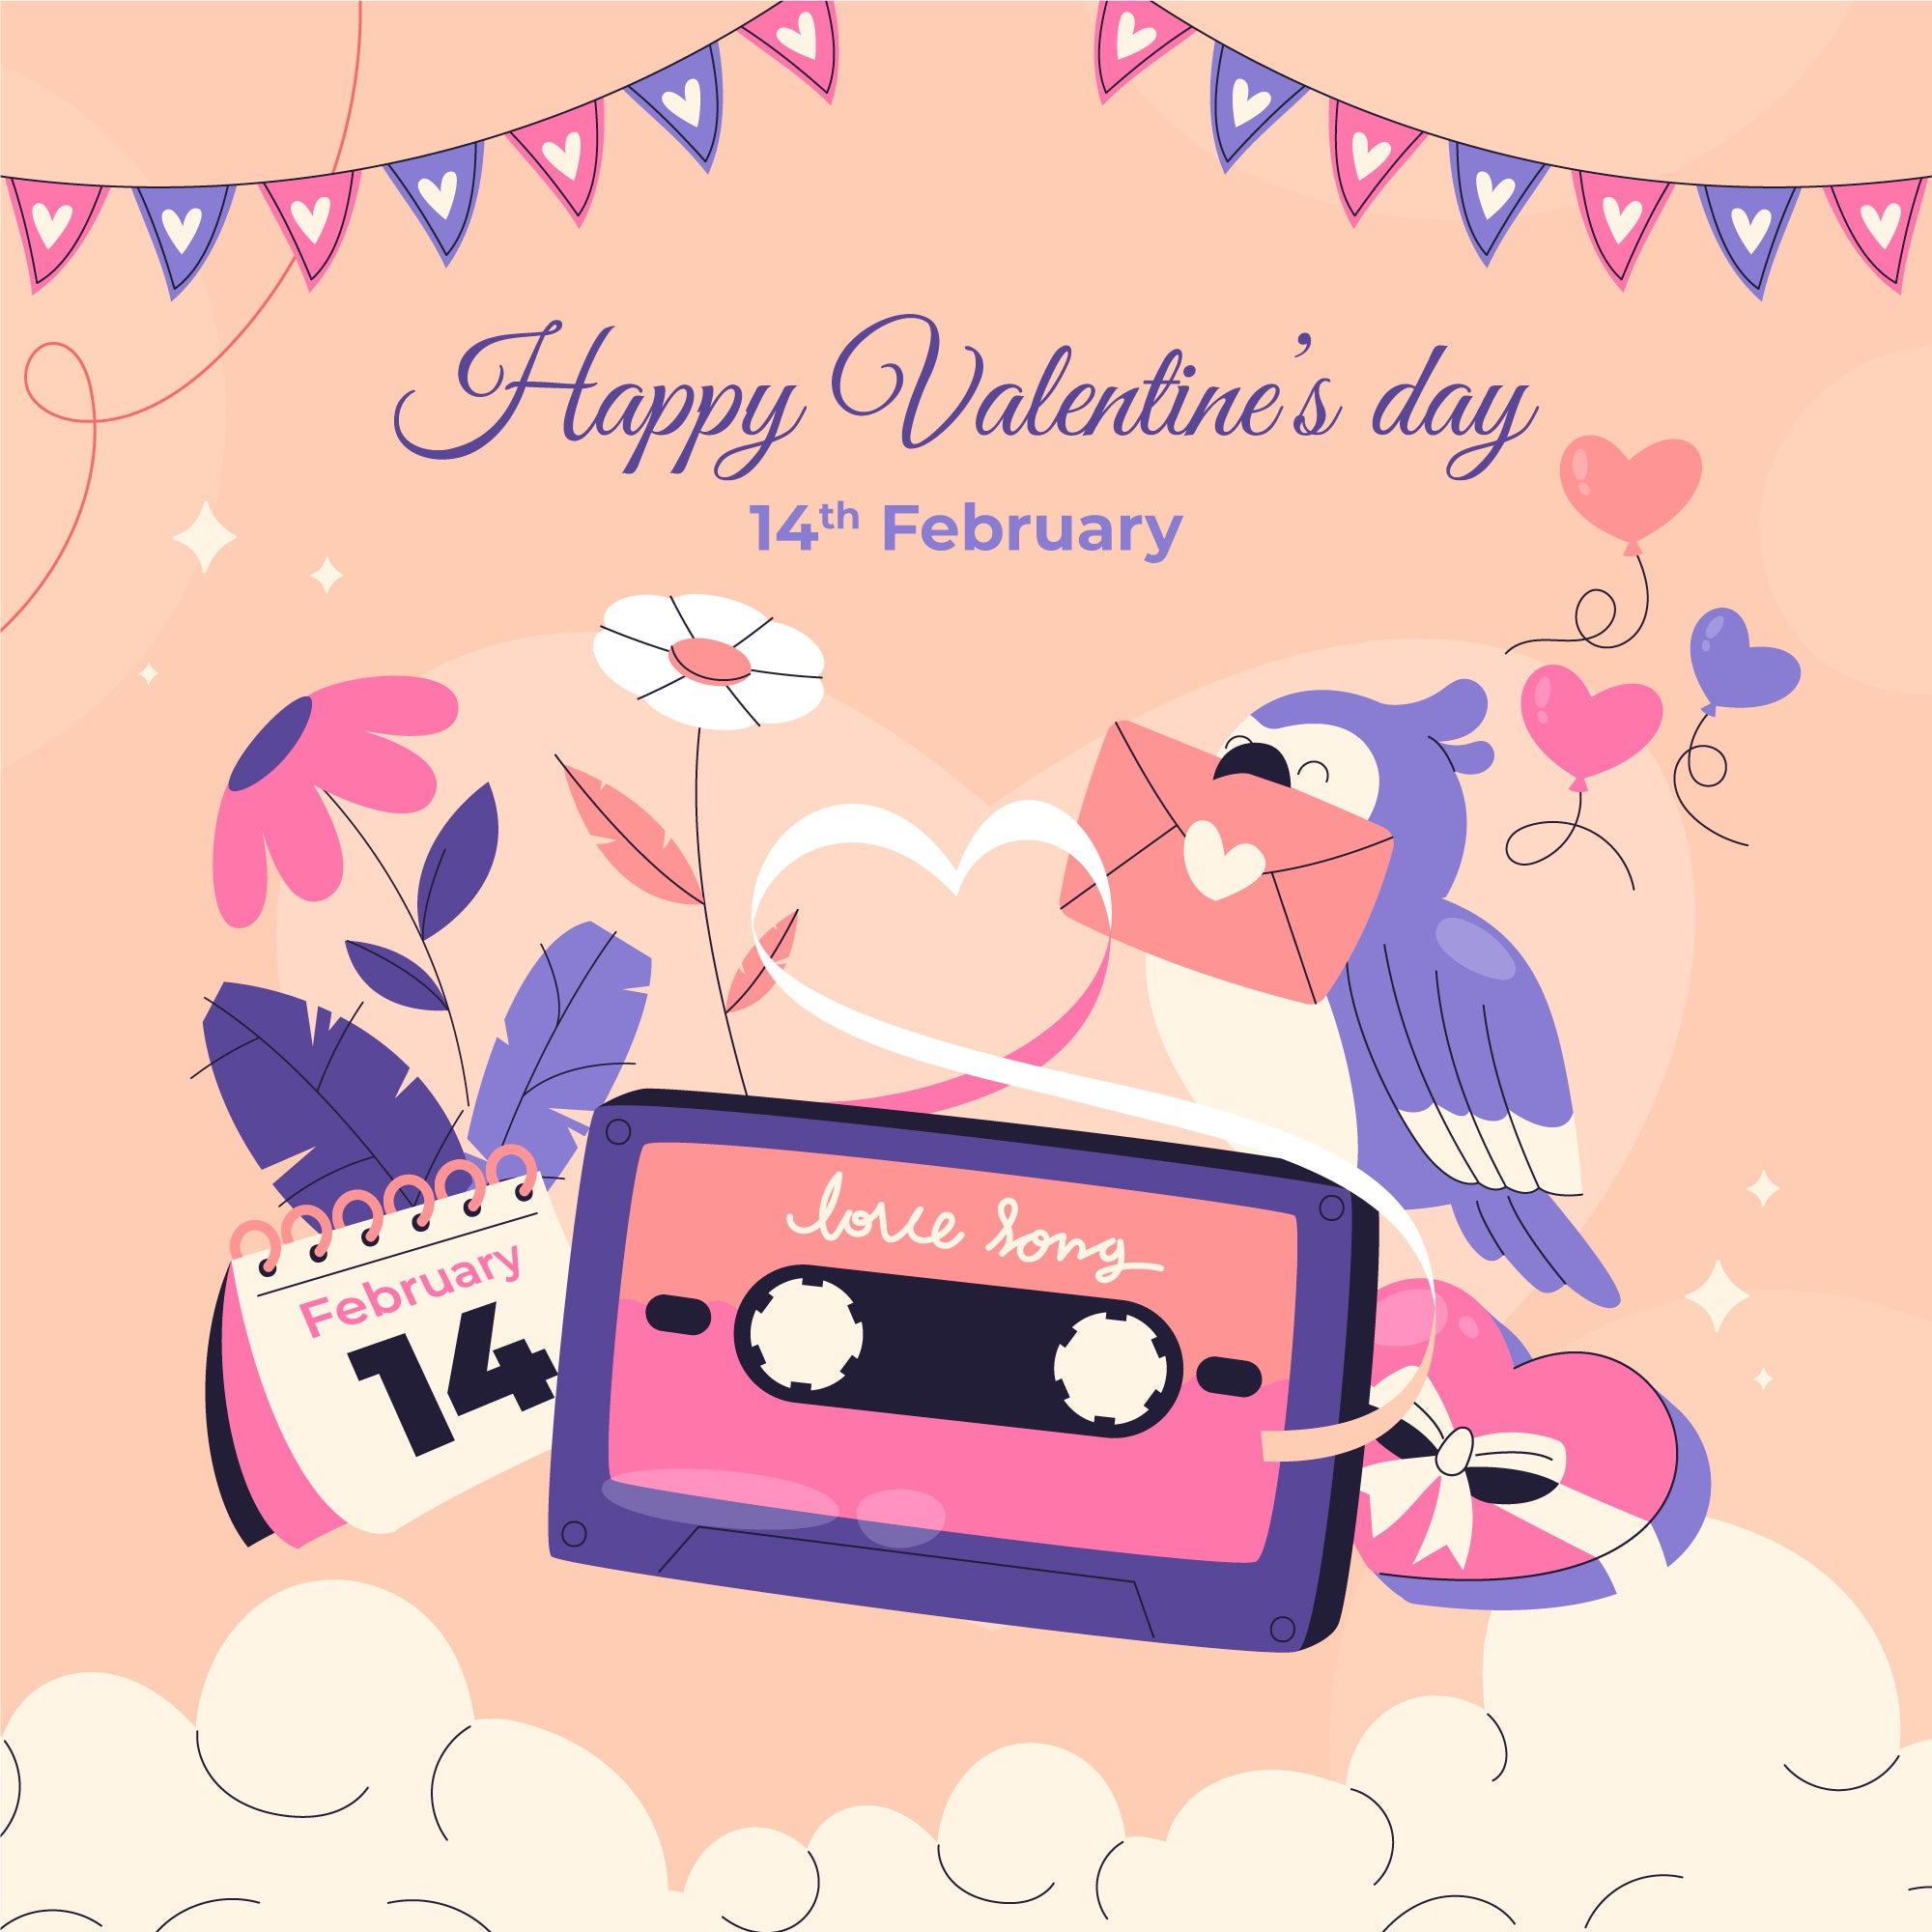 Valentine's Day 2023: Top 15 Songs To Play On Valentine's Day